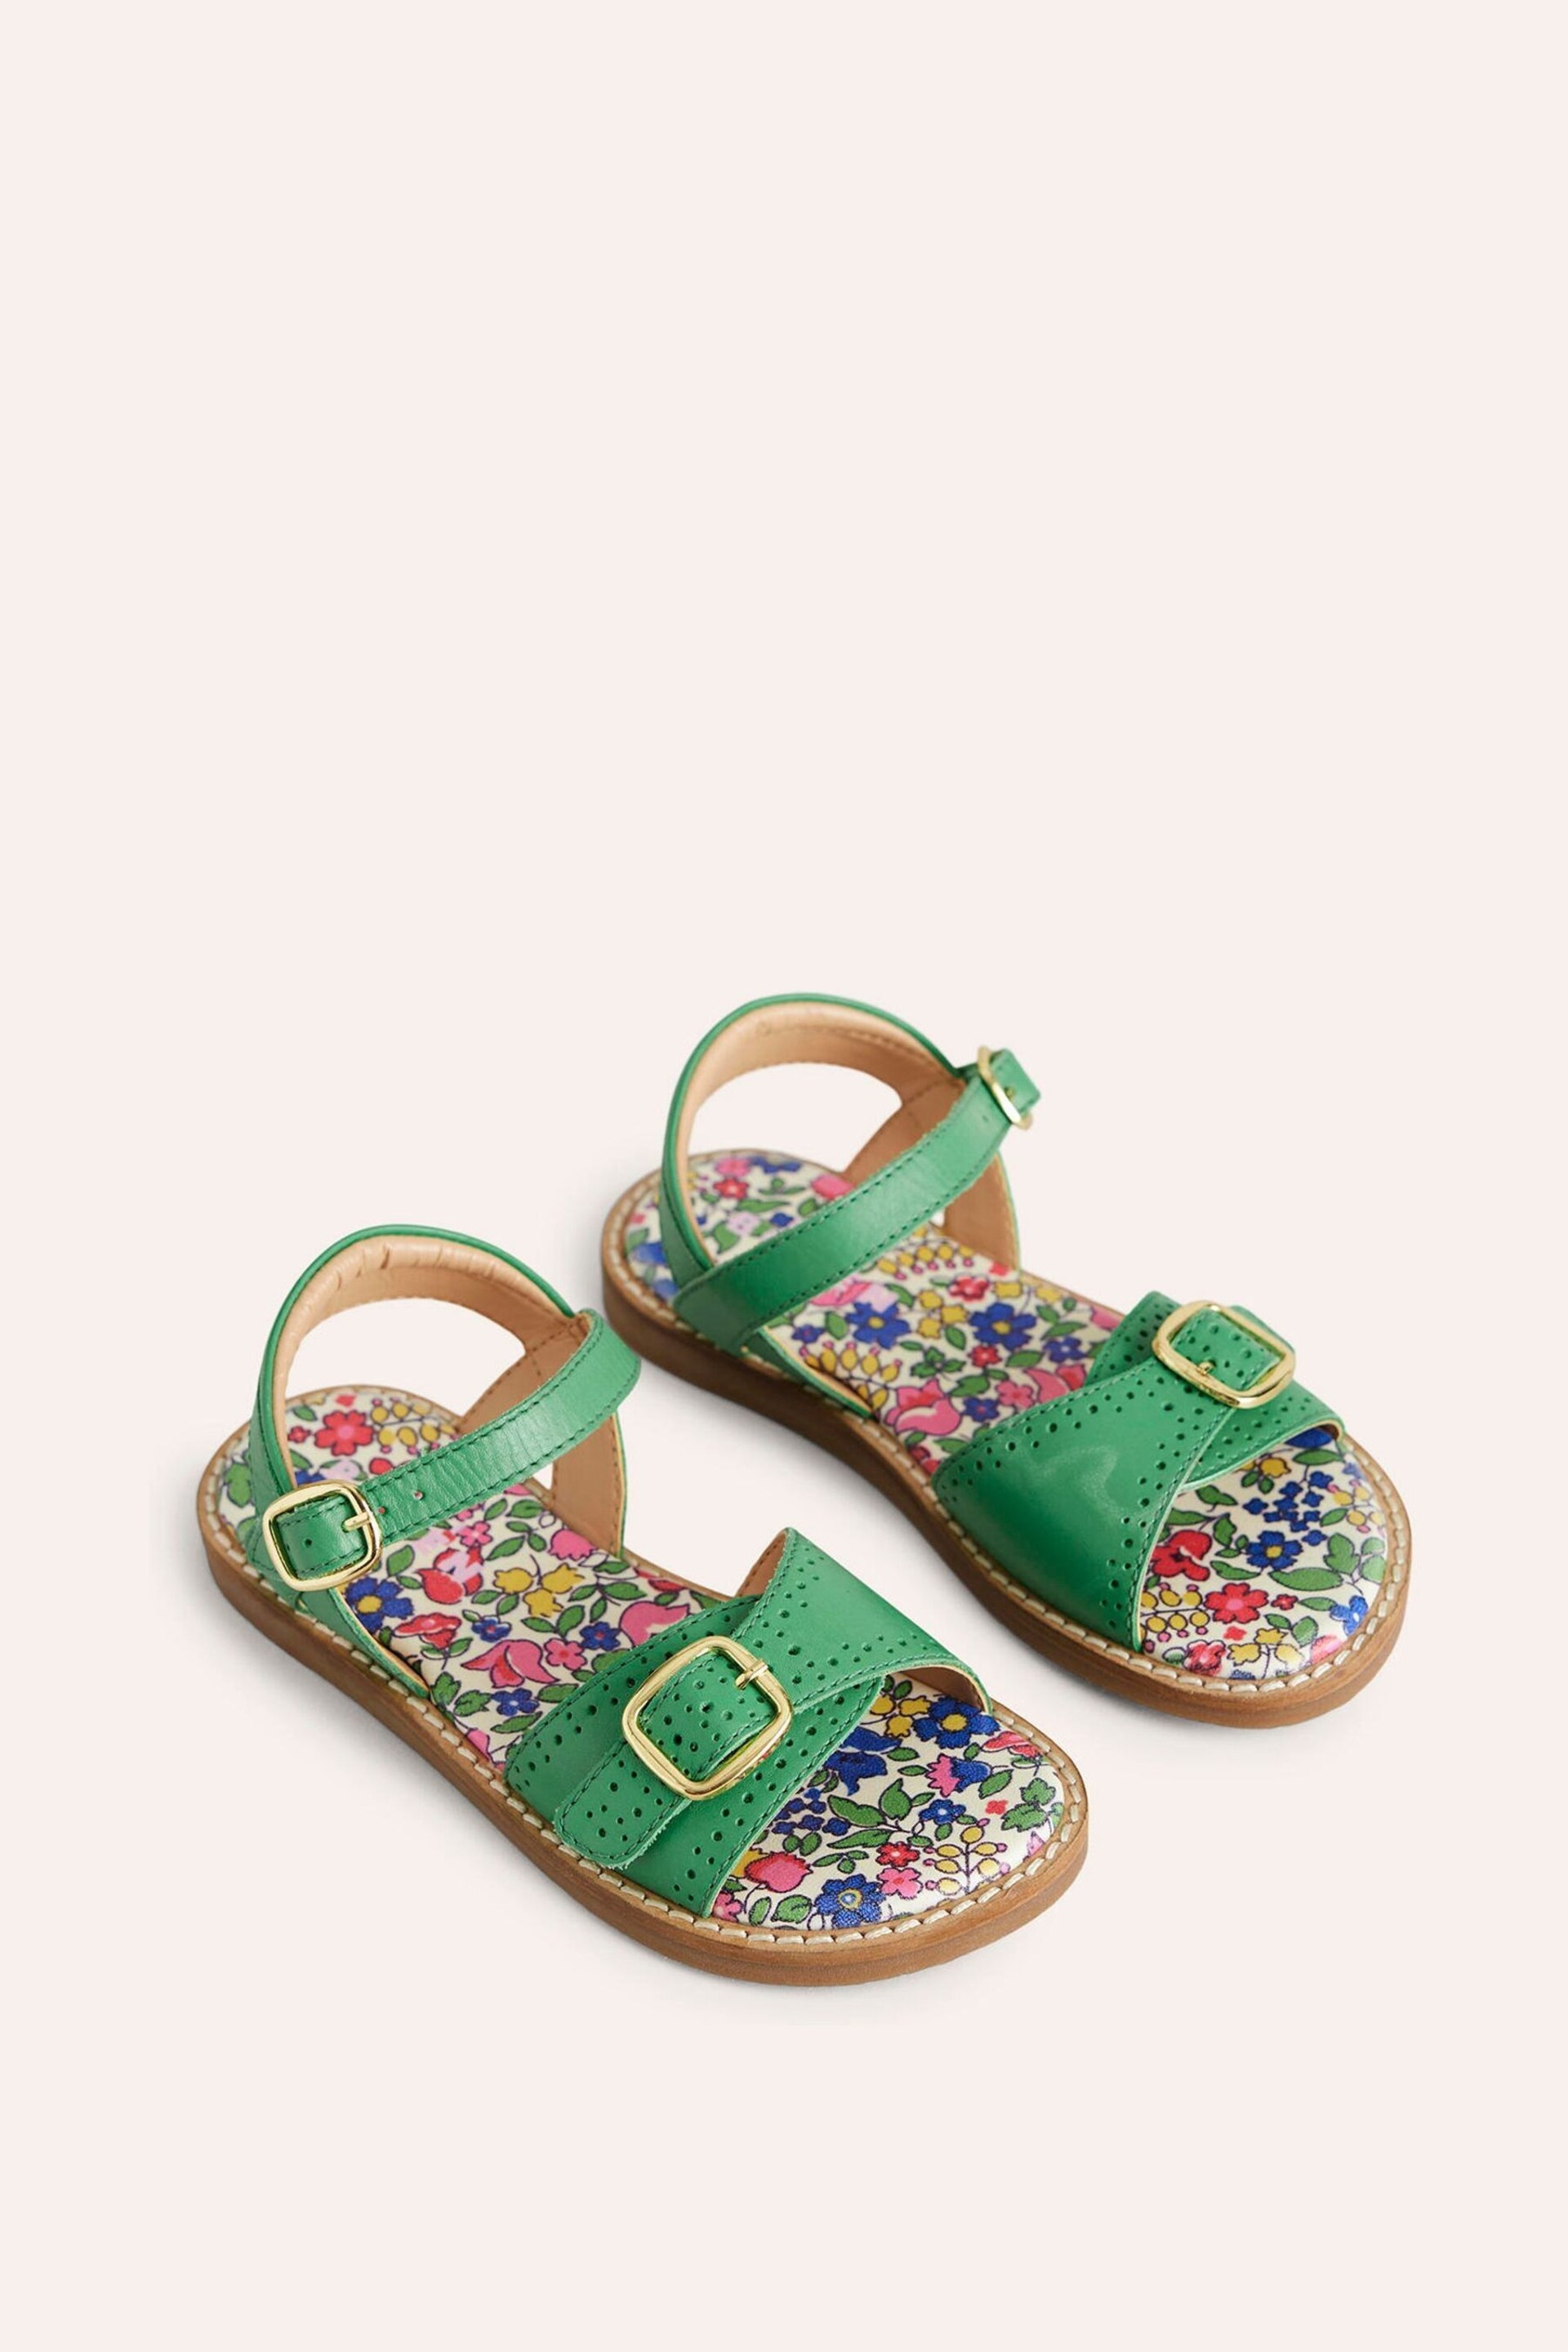 Boden Green Leather Buckle Sandals - Image 1 of 4